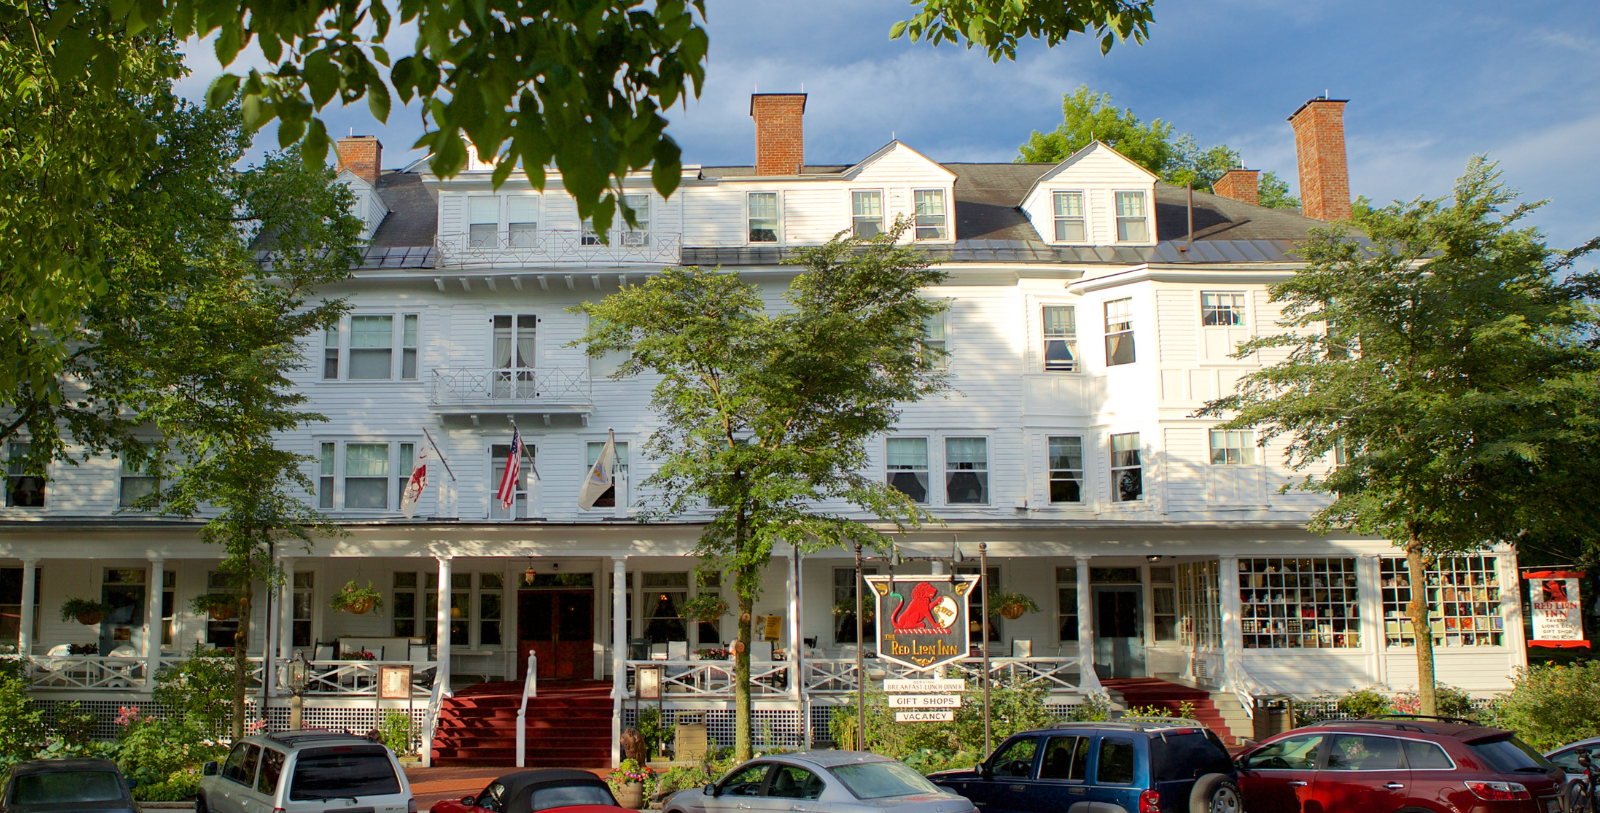 Image of The Red Lion Inn, 1773, a member of Historic Hotels of America since 1989